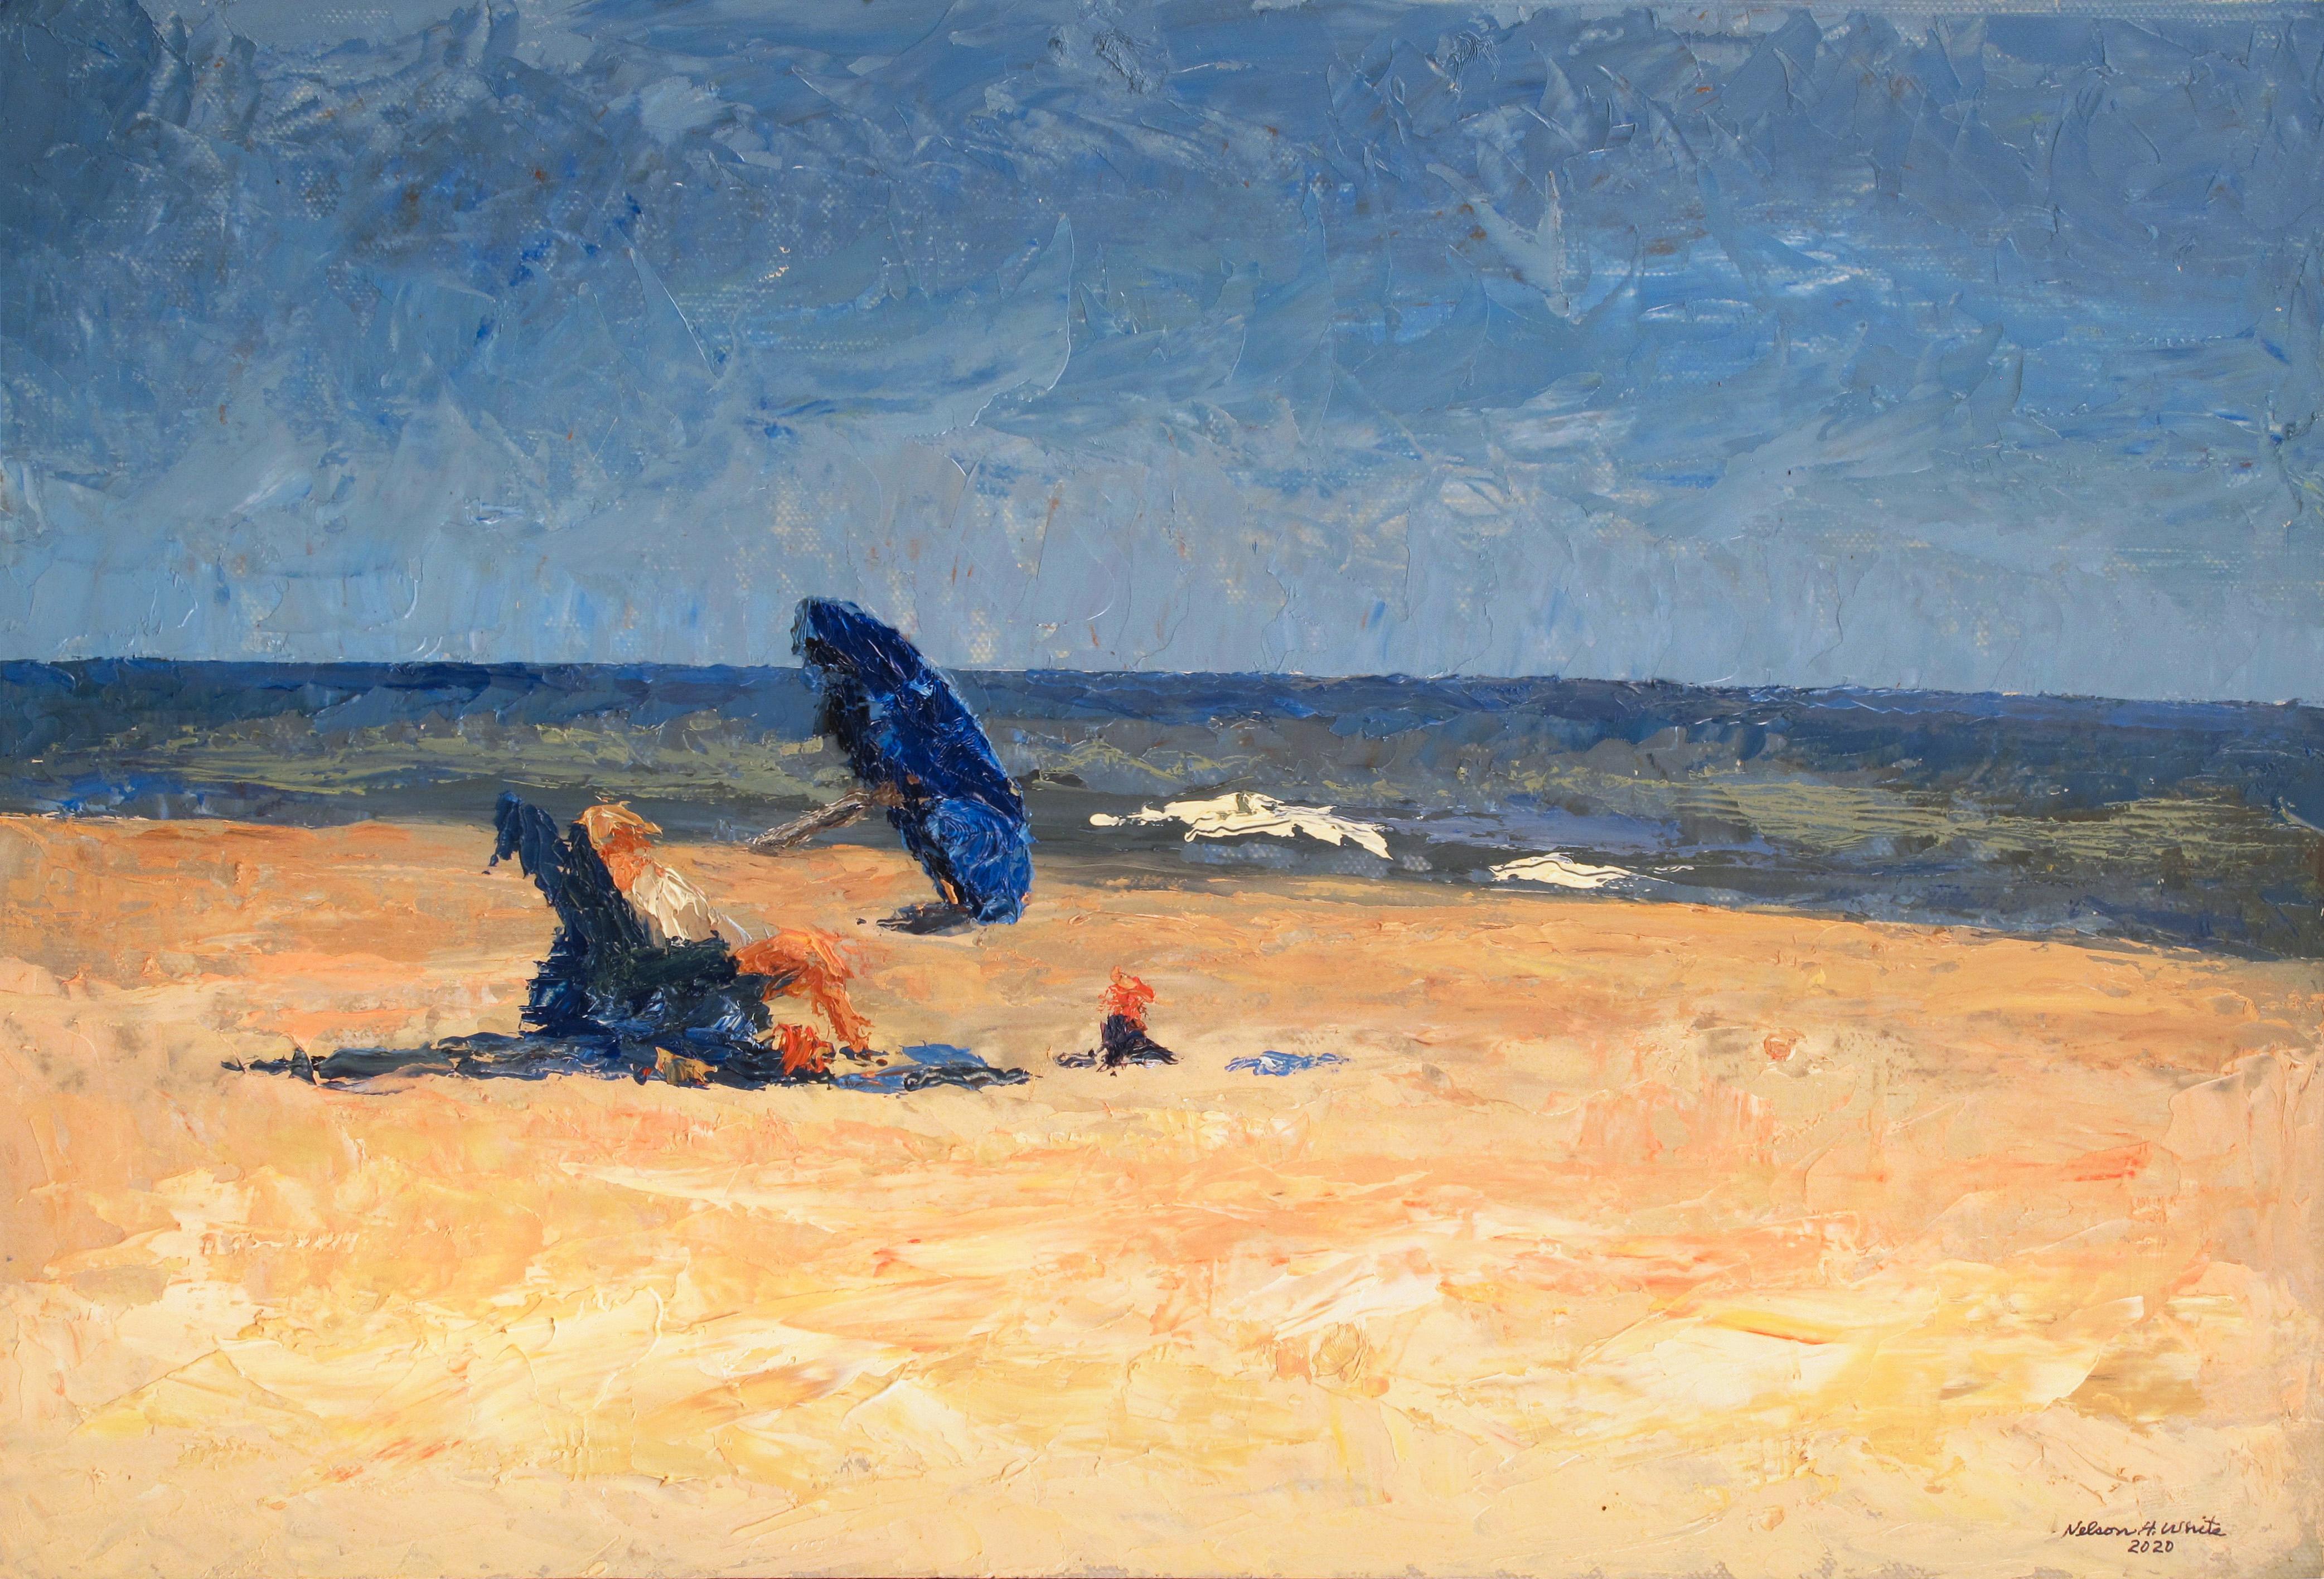 Nelson H. White Landscape Painting - Coopers Beach I, 08.01.2020